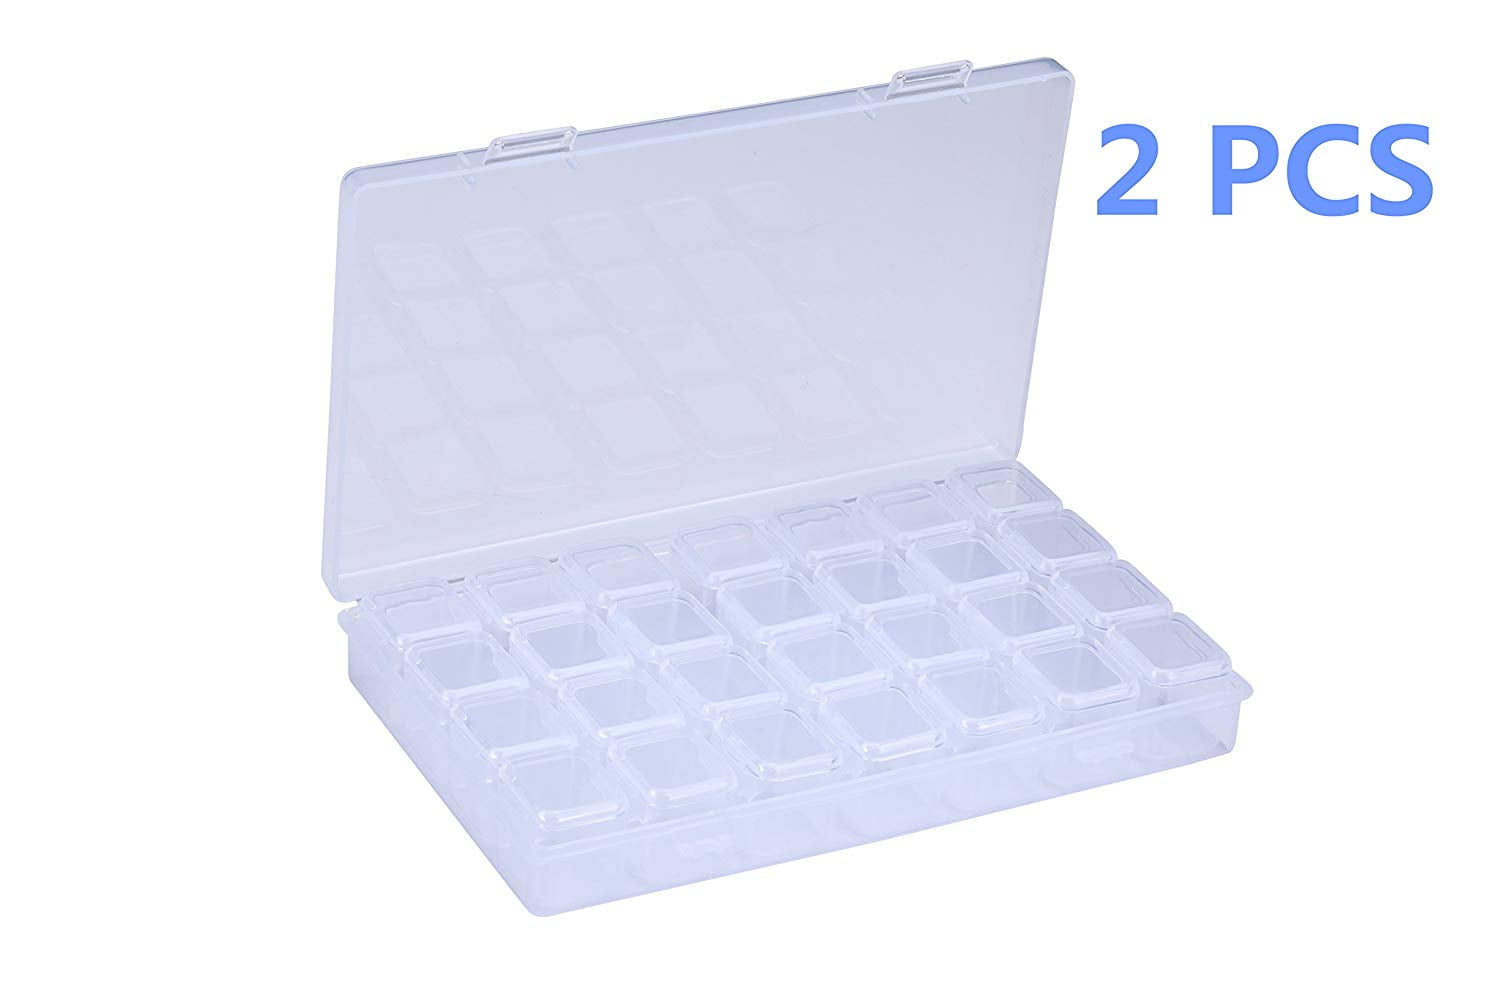 2Pk Bright White Diamond Painting Trays with Lids and Removable Insert,  Bead, Nail, or Rhinestone Storage Tray by DPG - The Diamond Paint Group 